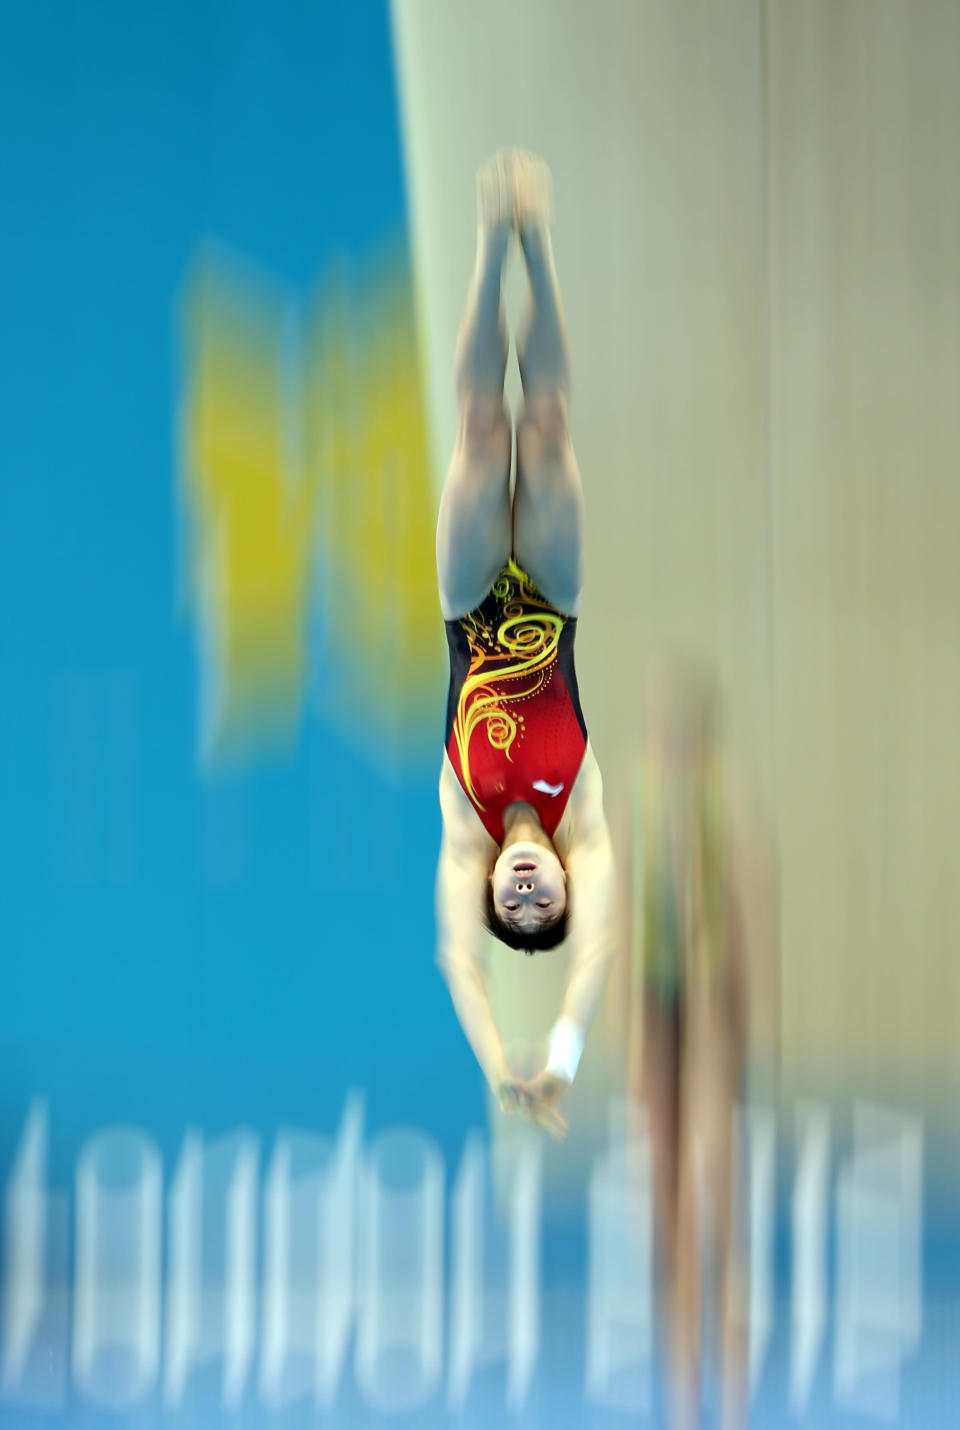 LONDON, ENGLAND - JULY 28: Ruolin Chen of China takes part in a diving training session during the 2012 London Olympics at the Aquatics Centre on July 28, 2012 in London, England. (Photo by Ian MacNicol/Getty Images)